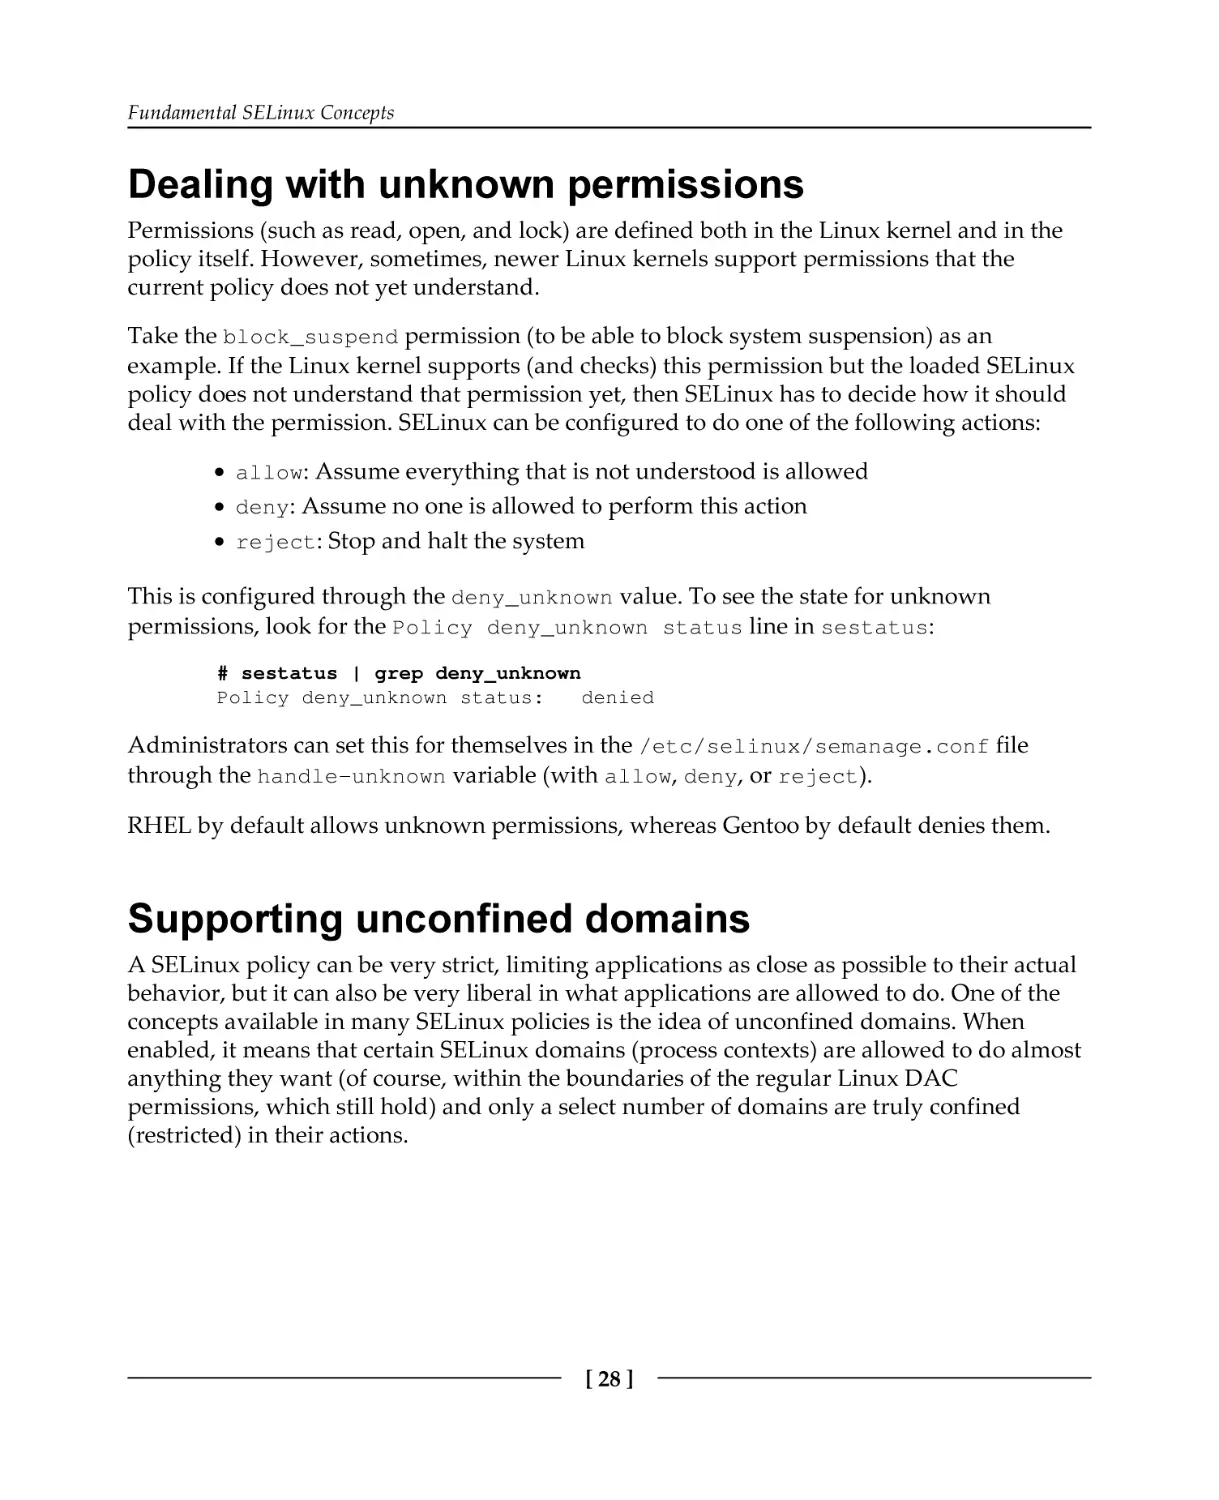 Dealing with unknown permissions
Supporting unconfined domains